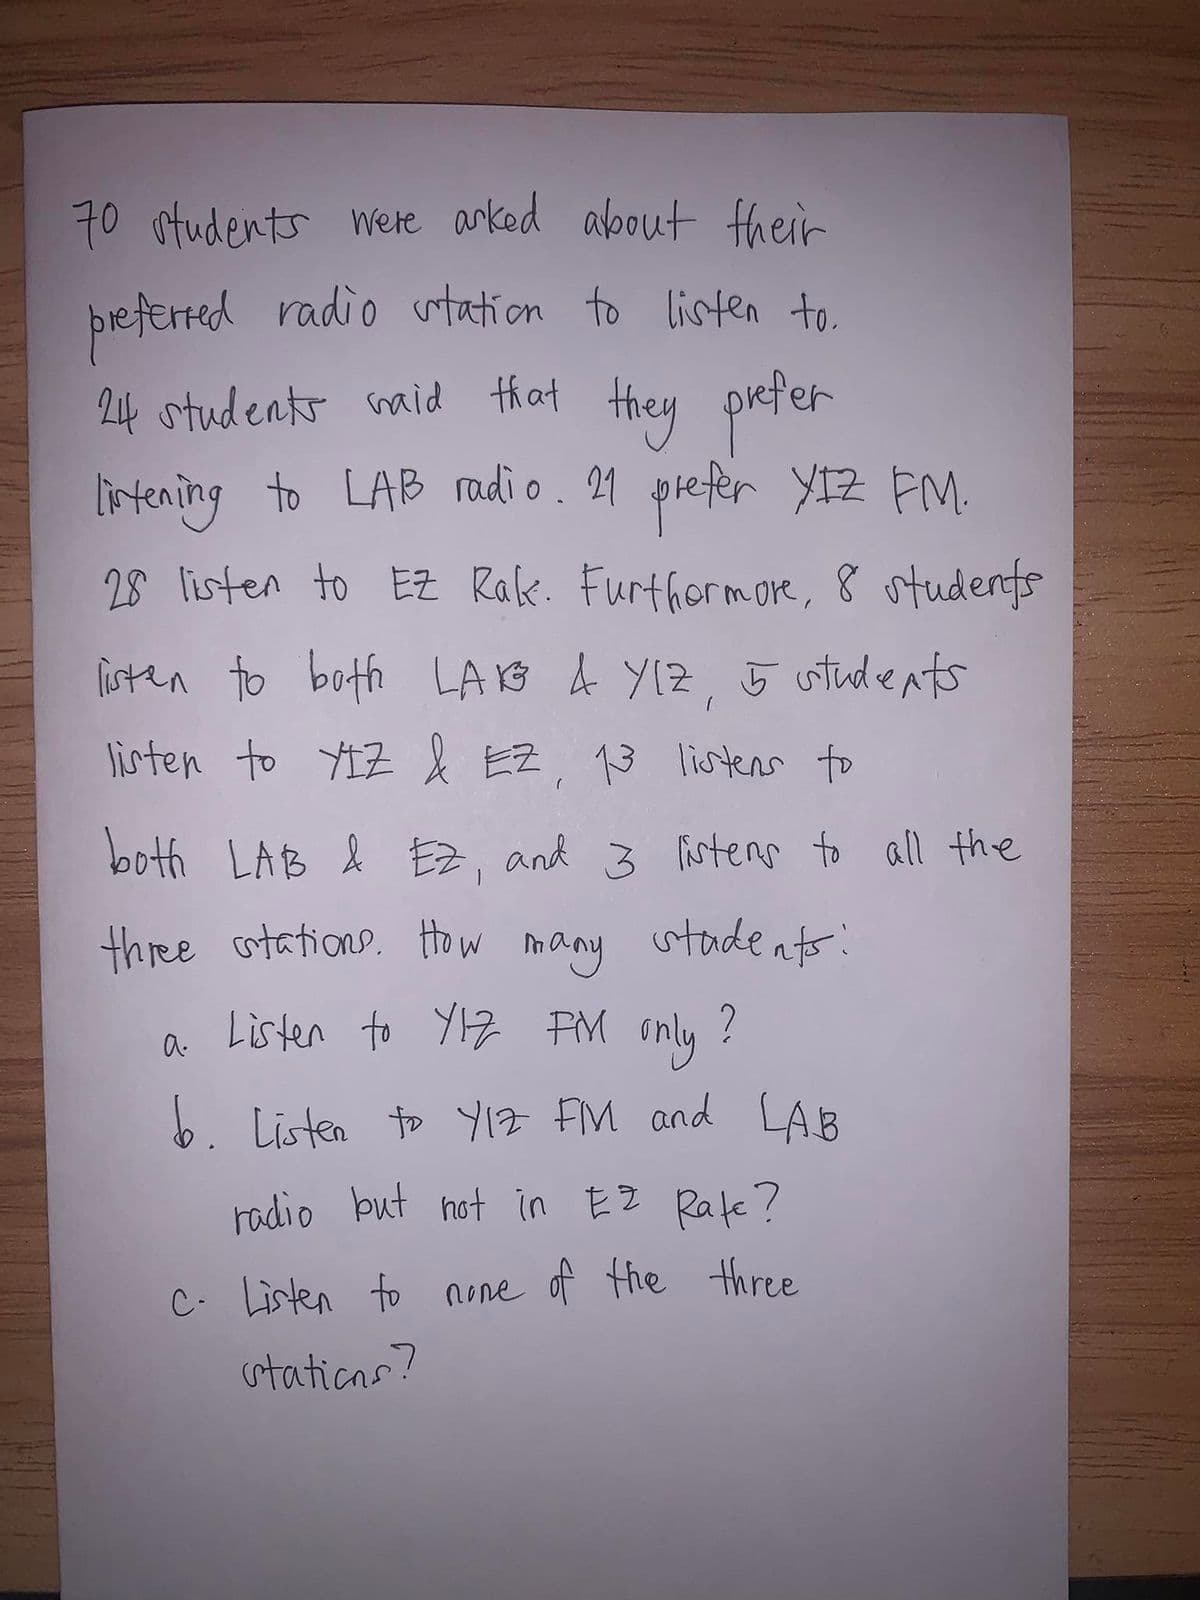 70 students were arked about their
pretered radio utation to listen to
24 otudents maid that they prefer
they preter
lintening to LAB mdi o. 21 prefer YI2 FM.
28 listen to EZ Rake. Furthormor, 8 otudenfs
listen to both LAKG A Y1Z, 5 othdents
listen to YtZ l EZ, 13 listens to
both LAB & Ez, and 3 listens to all the
three cotations. How many stade nts:
a.
a Listen to Y7 PM only ?
6. Listen to YI1Z FM and LAB
radio but hot in EZ Rafe?
C. Listen to none of the three
stations?
